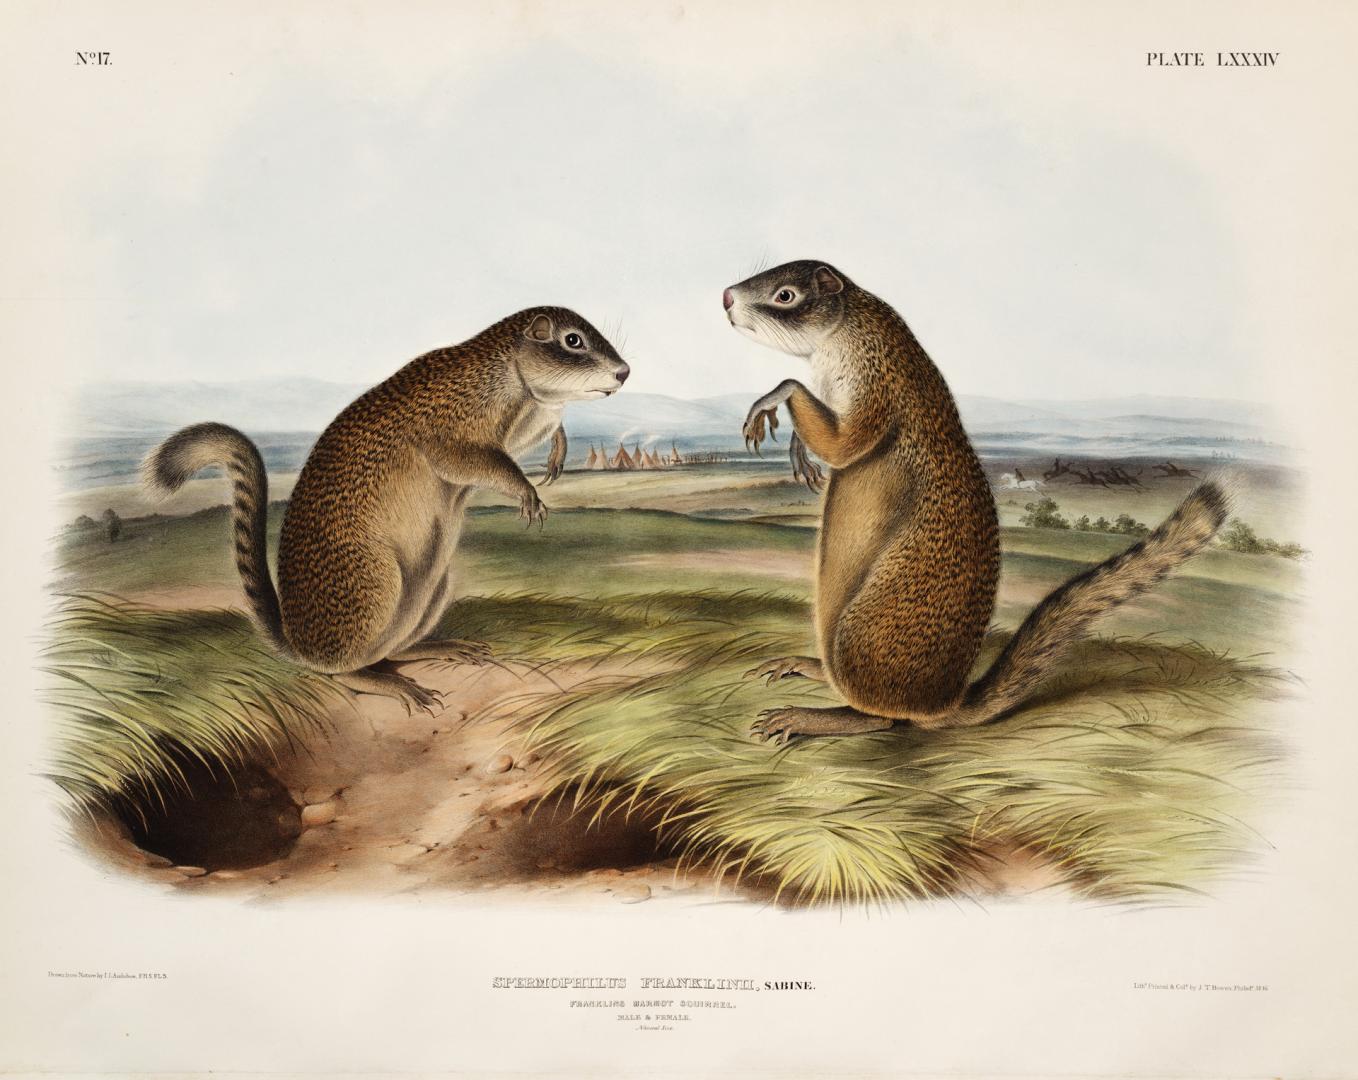 A hand-coloured image of two ground squirrels in a grassland setting they appear to be in conve ...